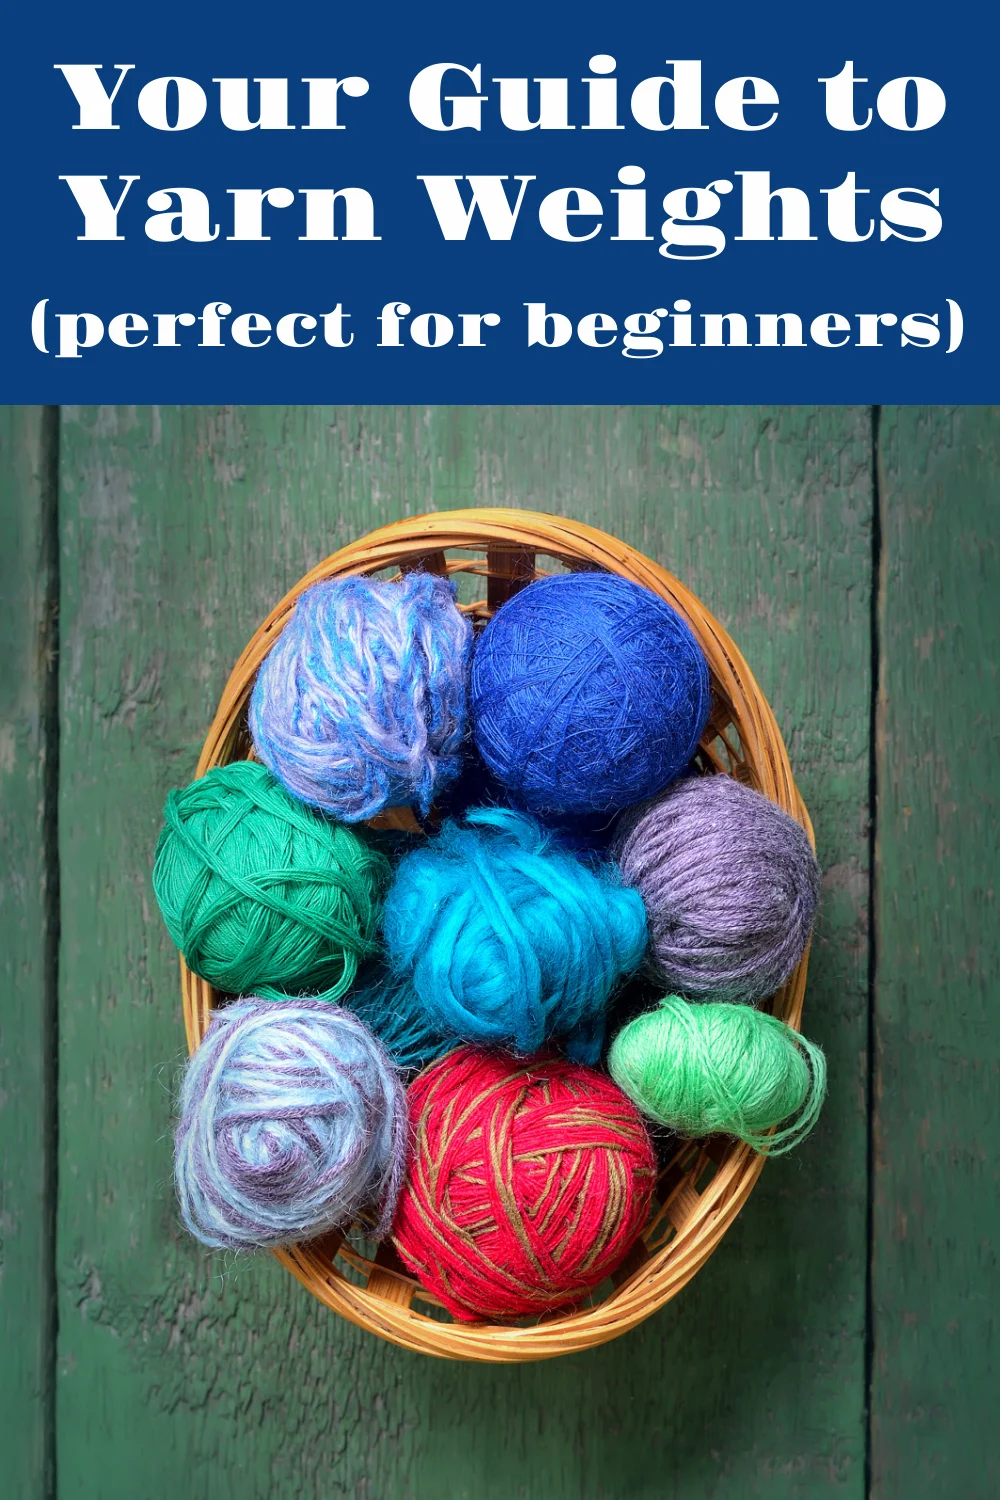 What is Worsted Weight Yarn? - Beginner's Guide to Yarn 